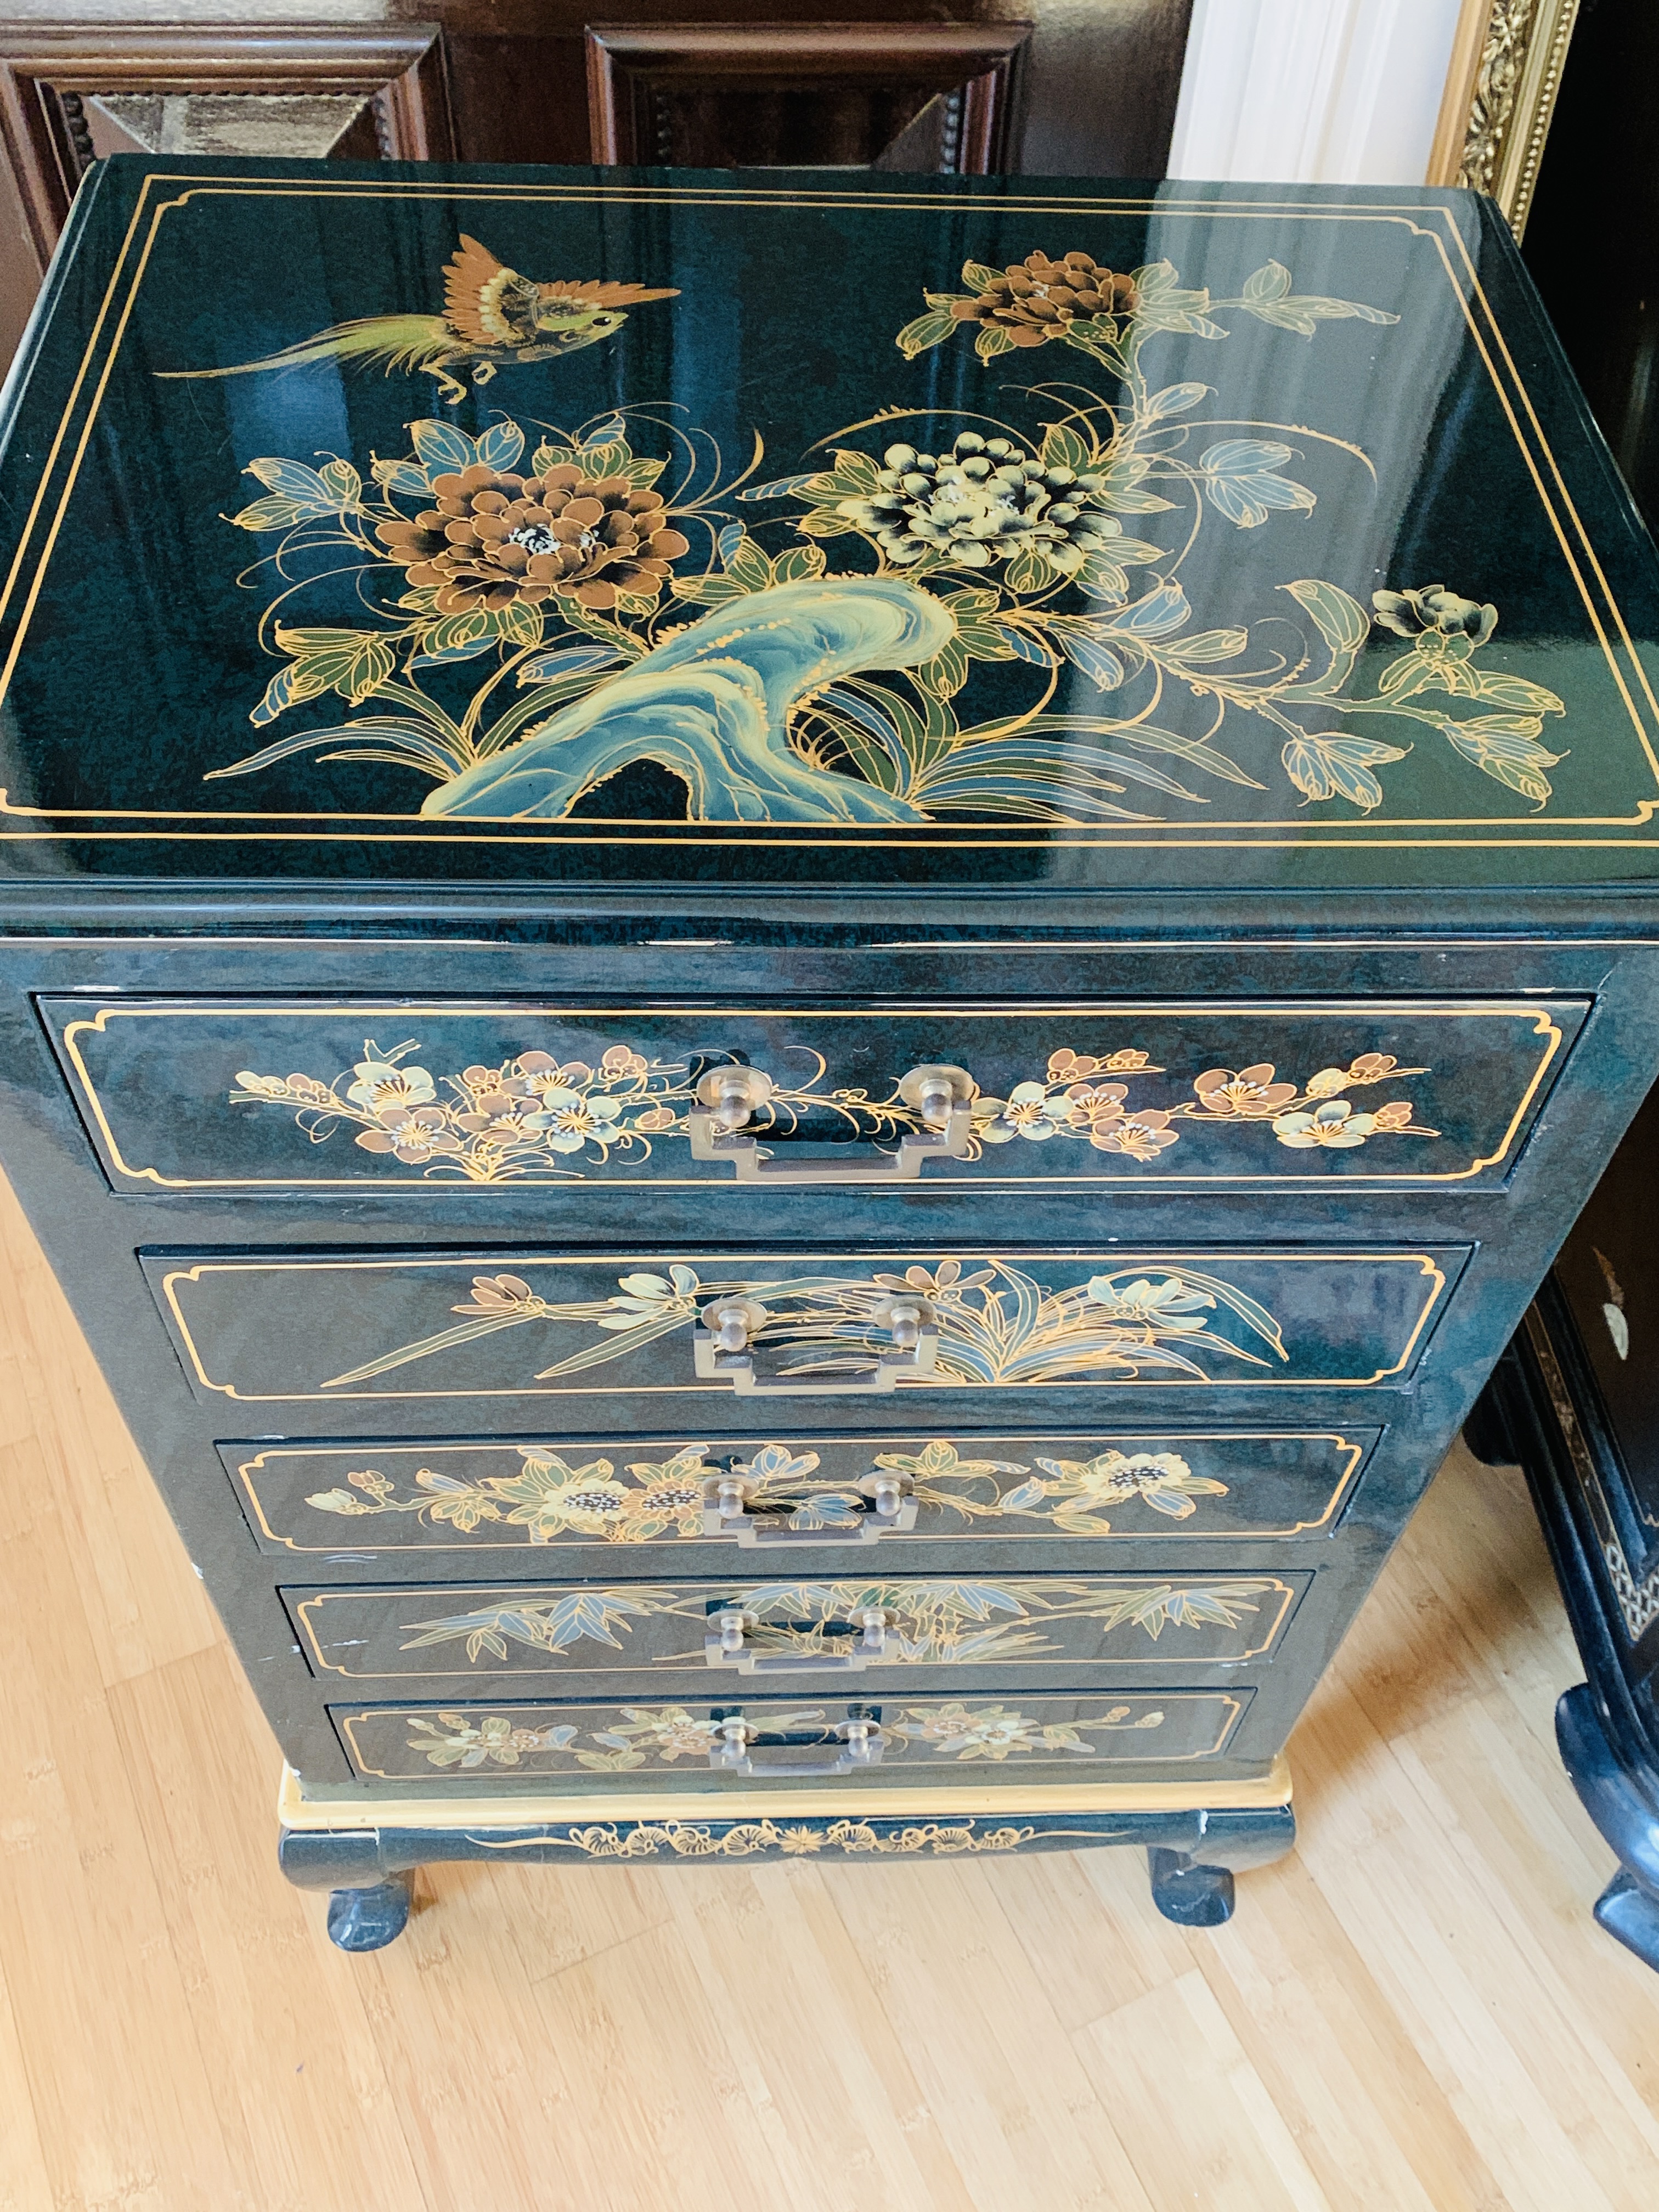 Oriental black lacquered chest of drawers - Image 2 of 5